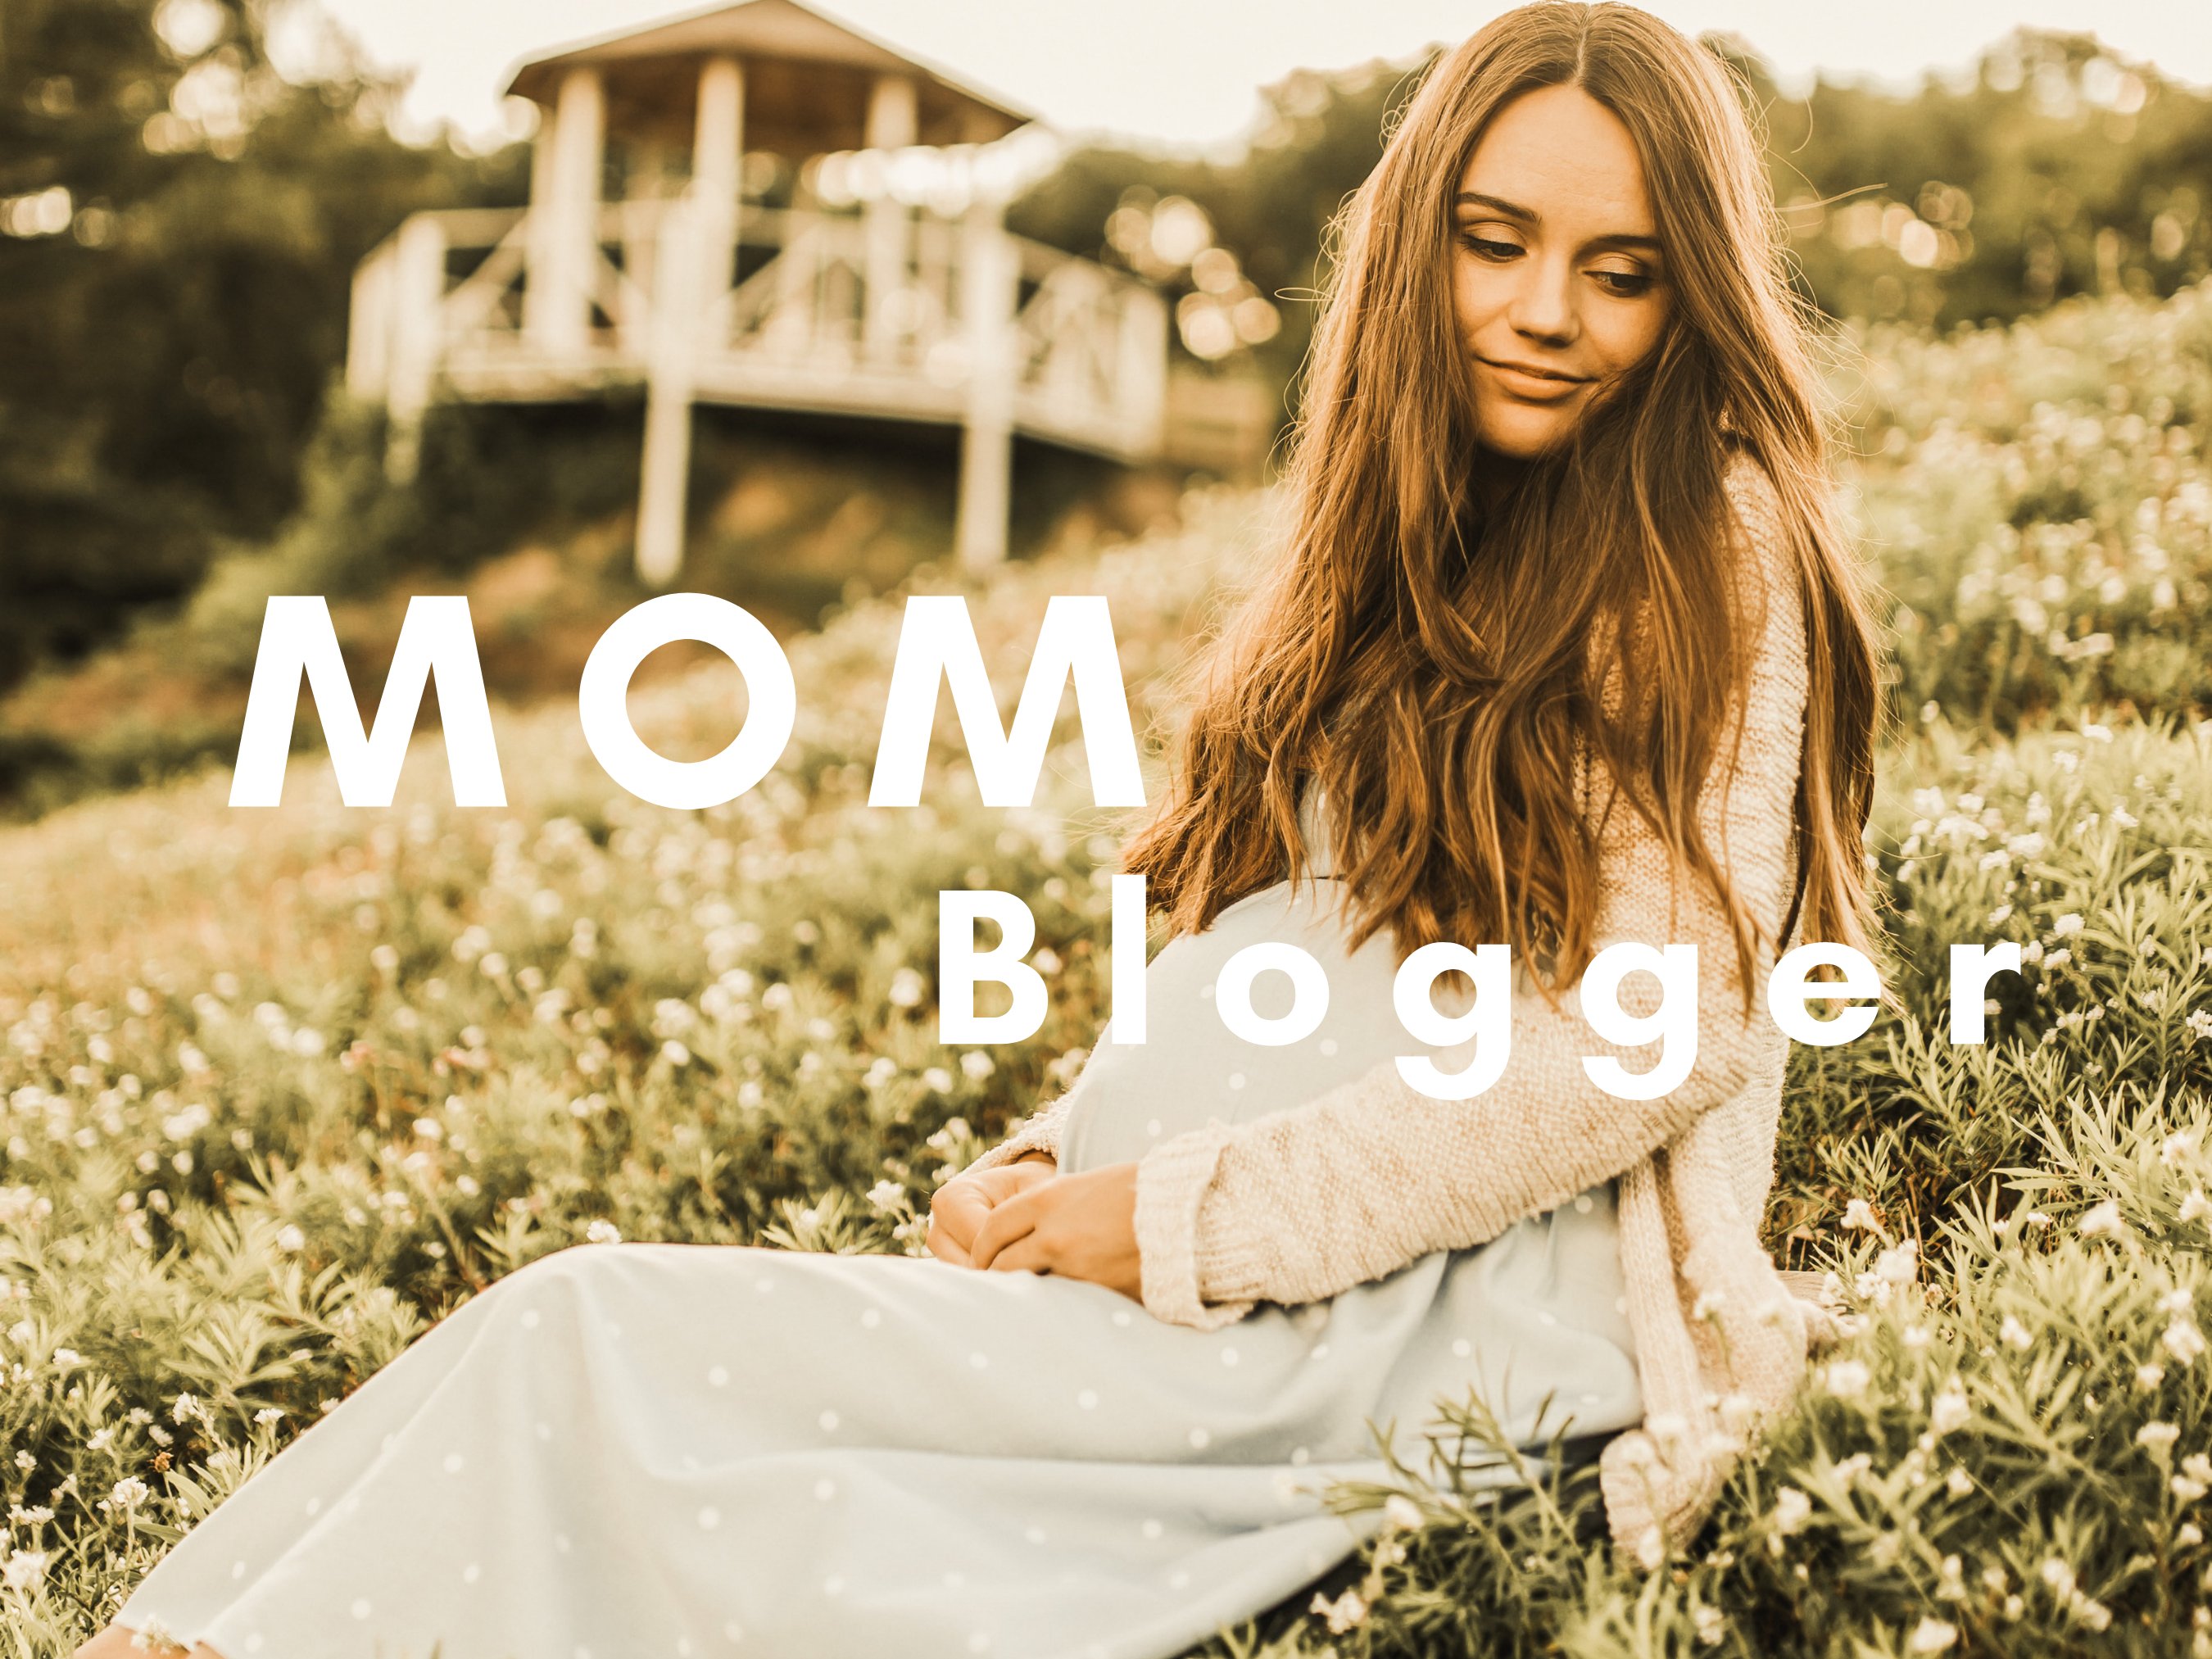 Mom Bloggers Presetscover image.